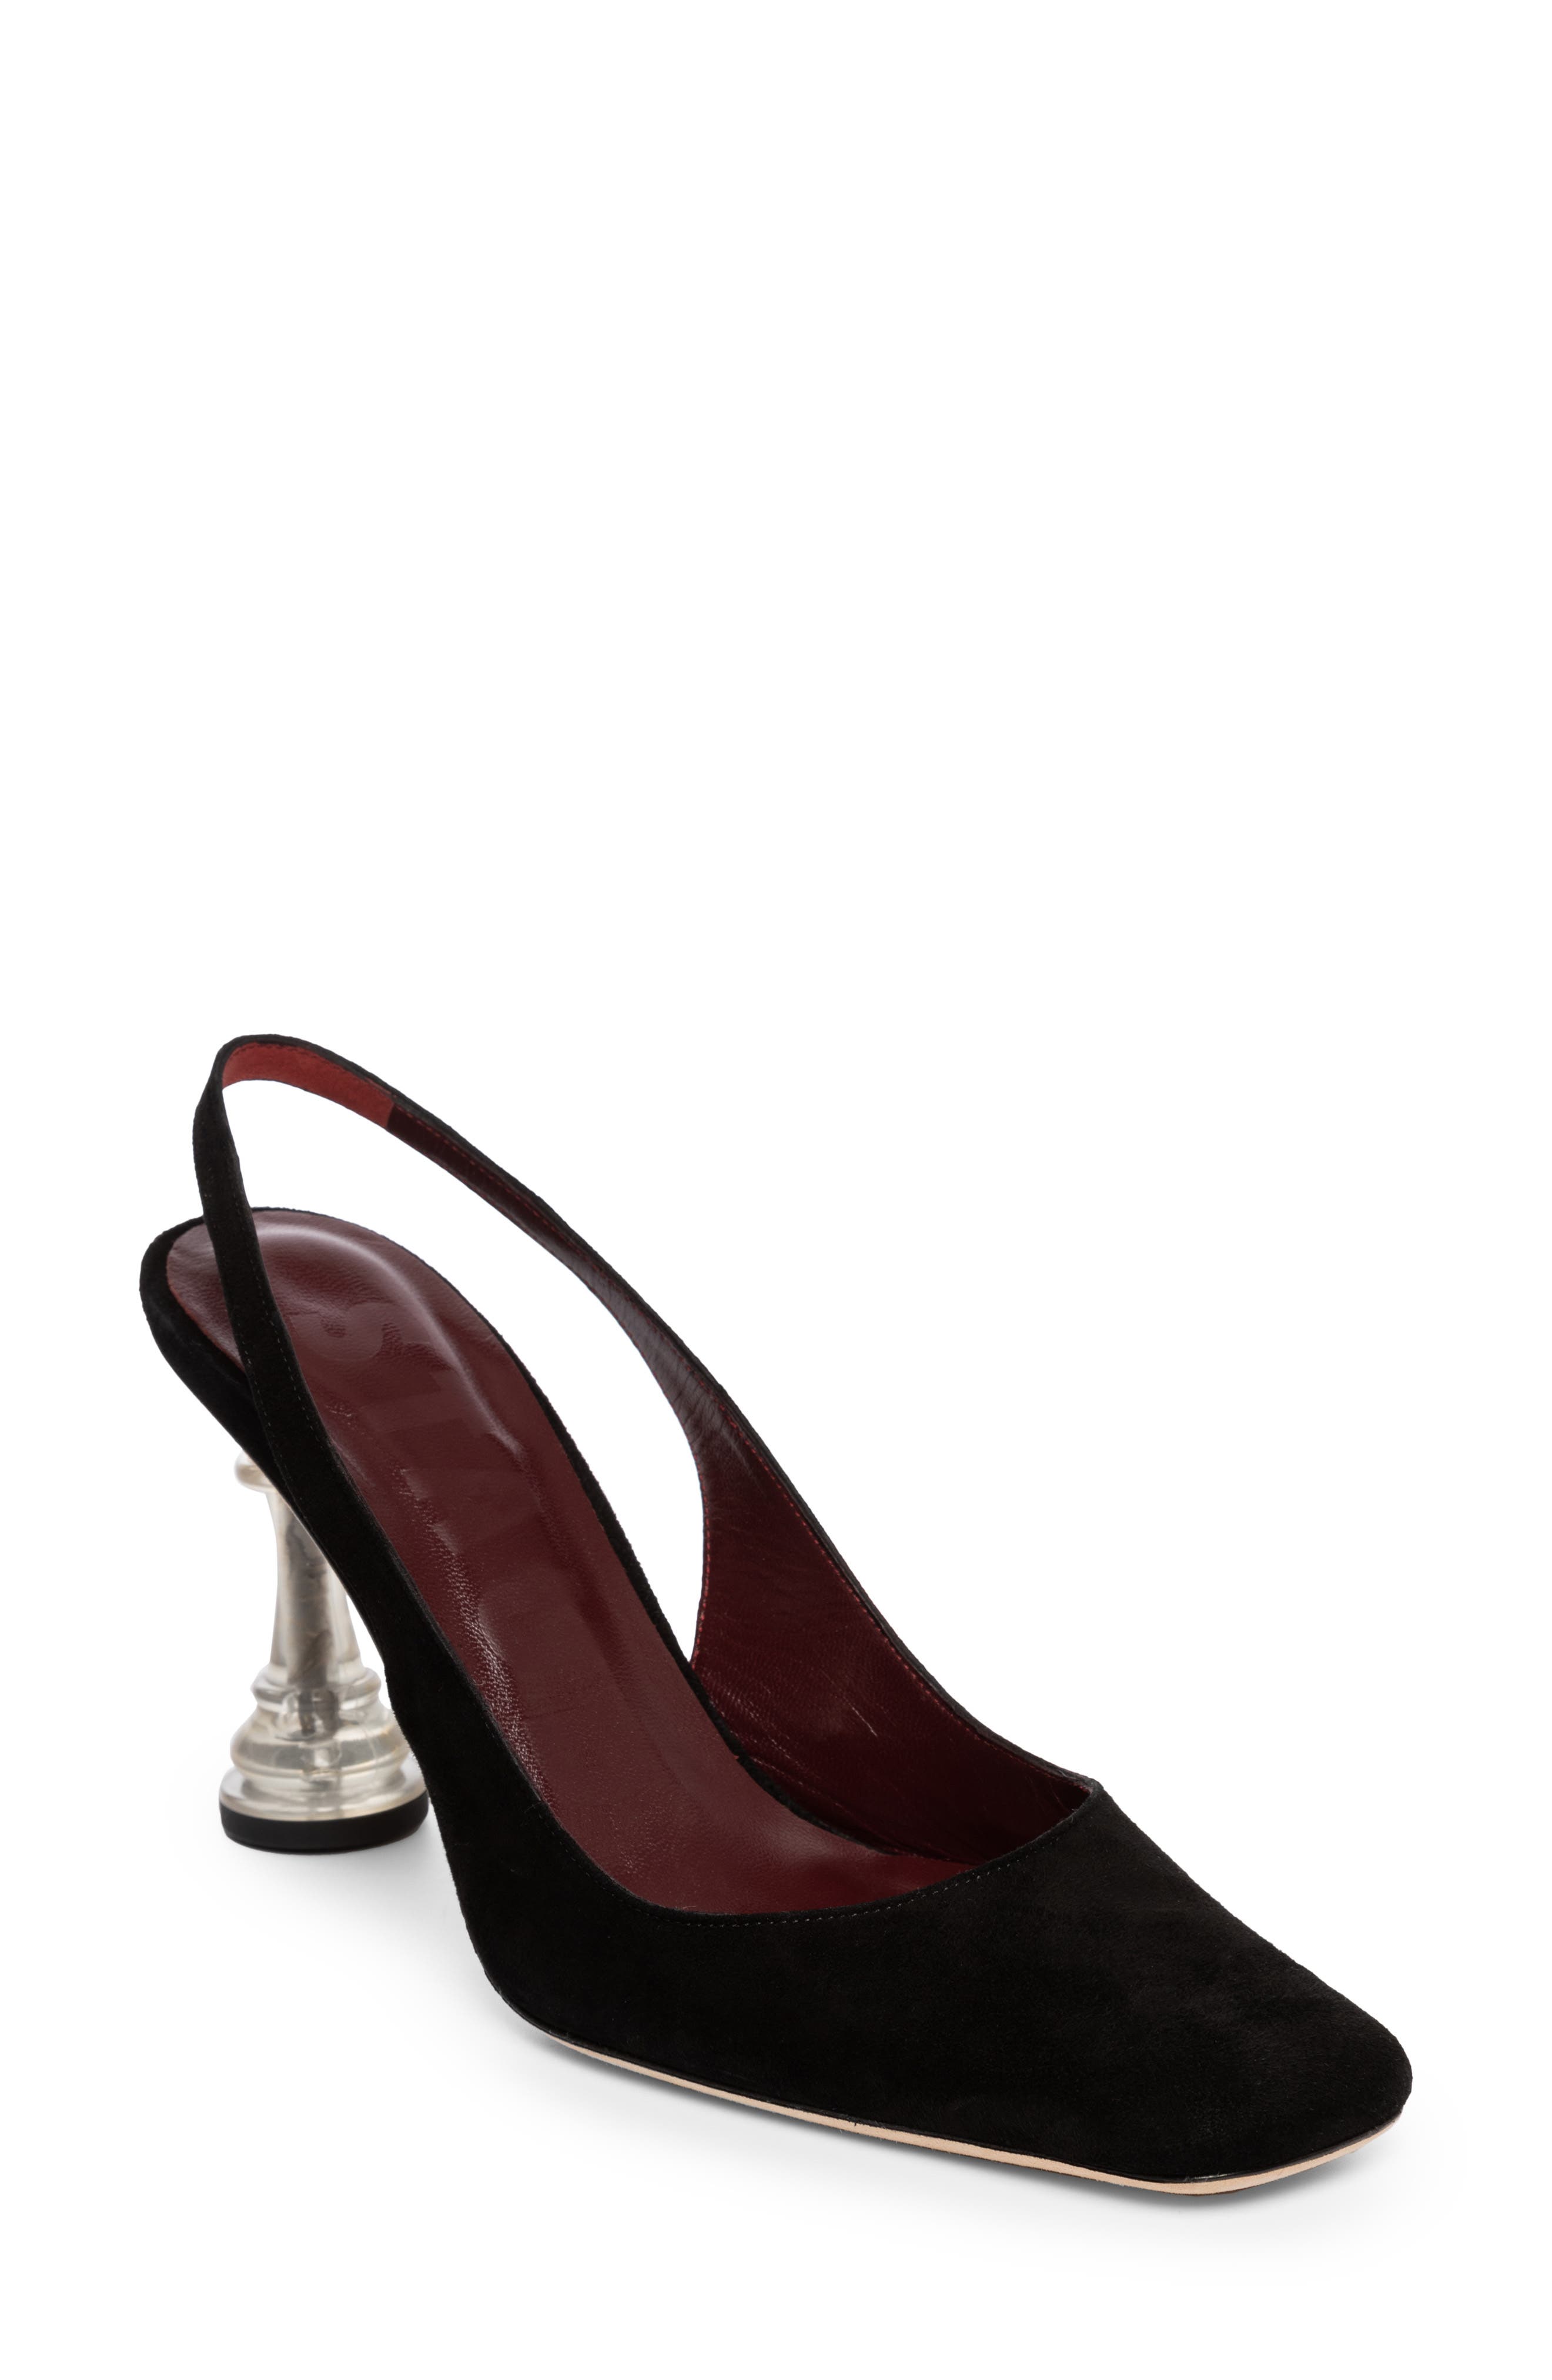 STAUD Chess Slingback Pump in Black at Nordstrom, Size 6.5Us